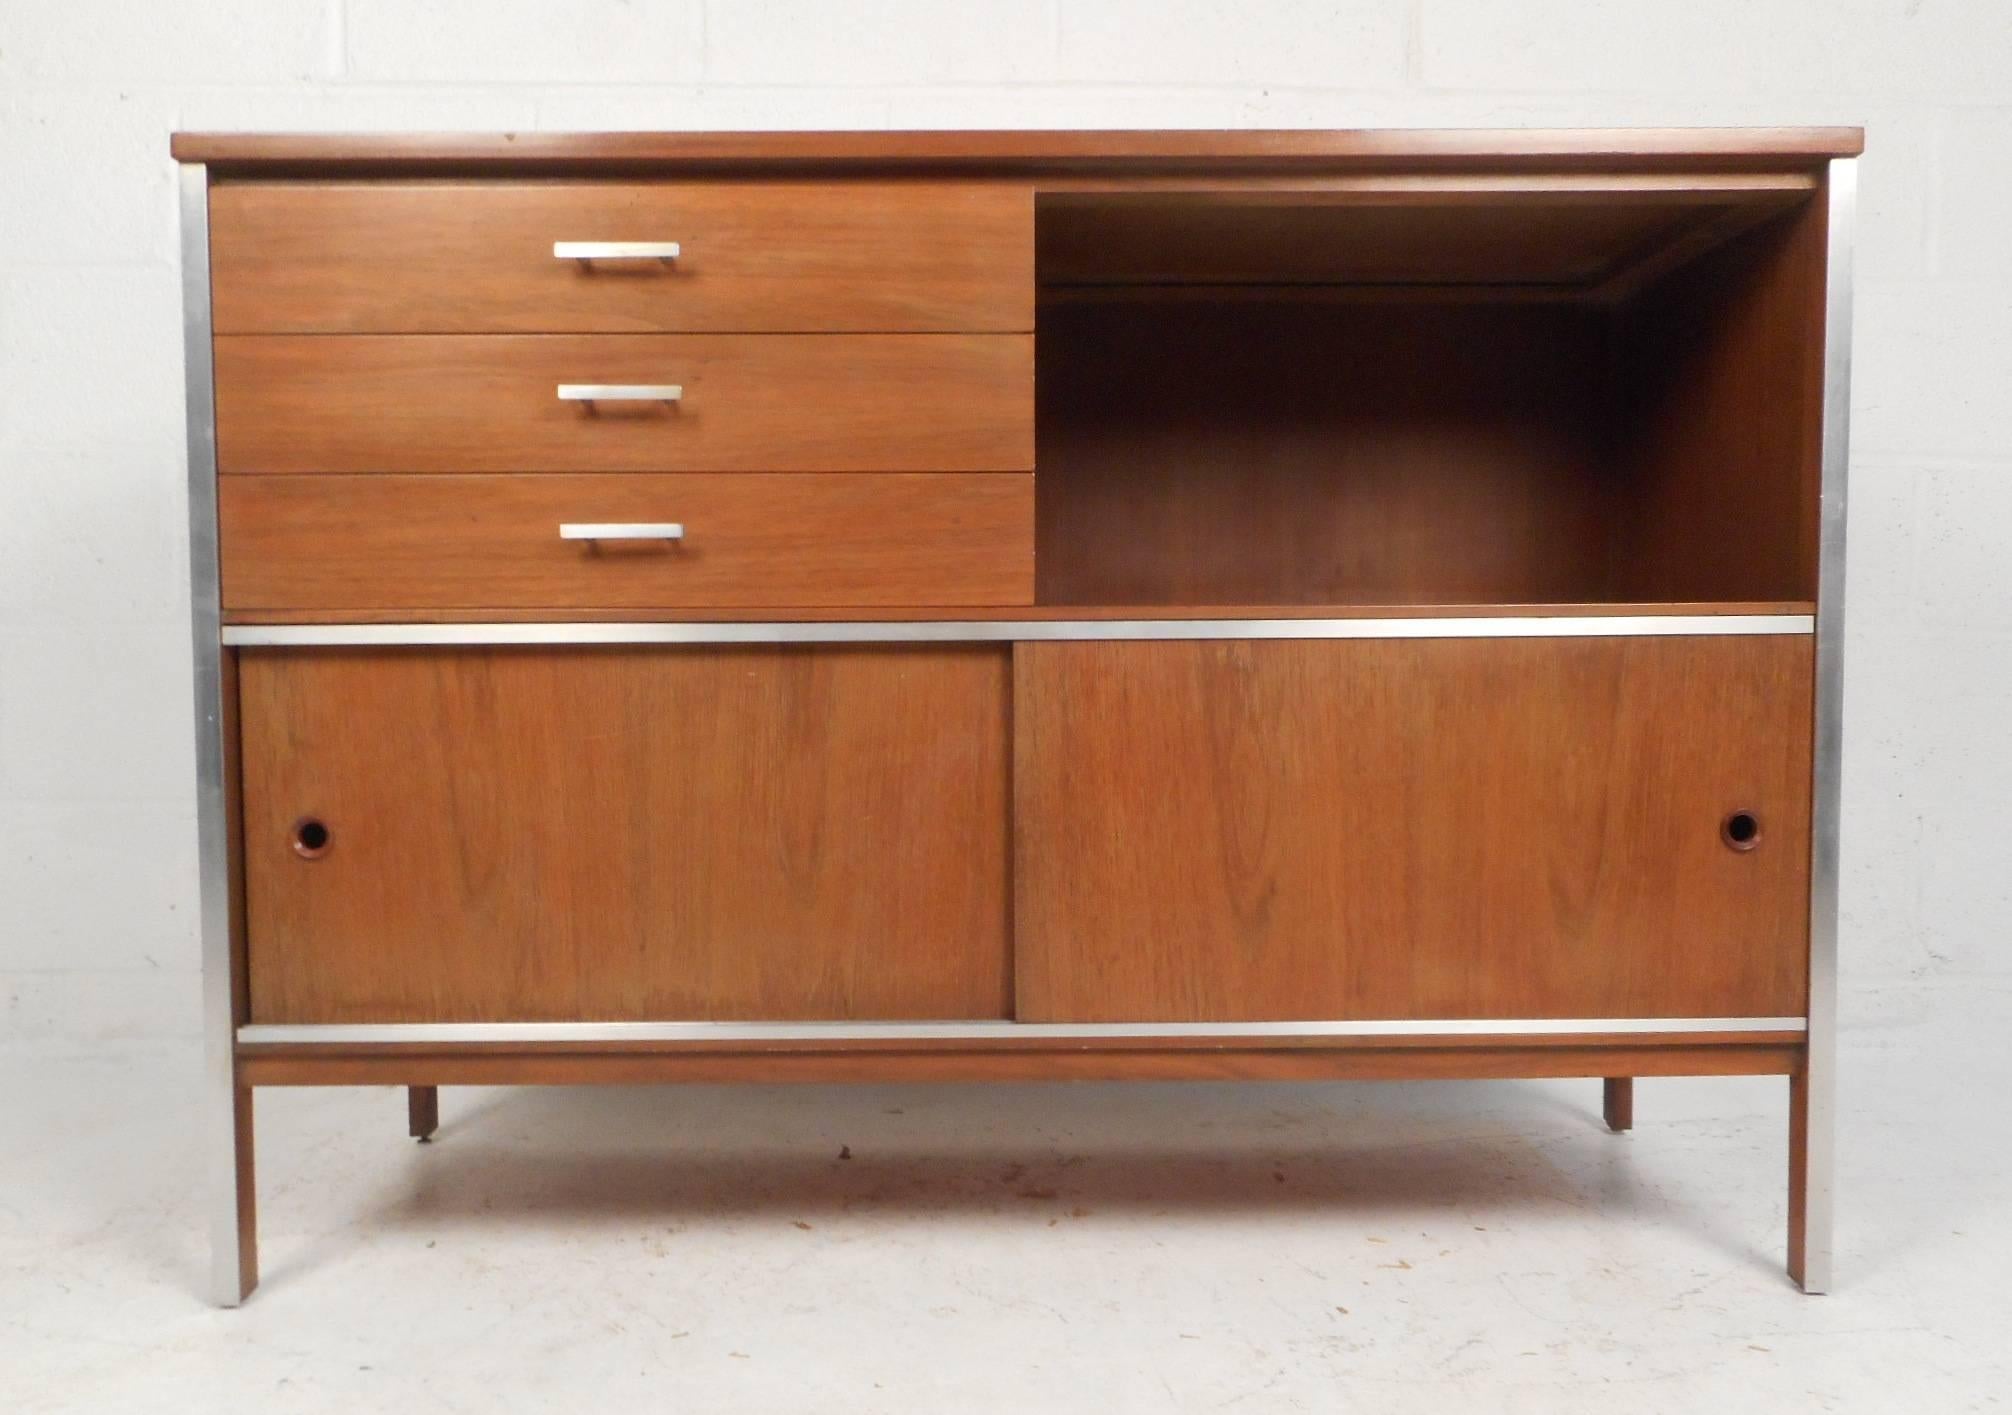 This beautiful vintage modern credenza features three hefty drawers, a storage compartment, and a lower compartment hidden by sliding doors. Sleek design with unusual circular recessed pulls on the sliding doors and unique metal drawer handles. This